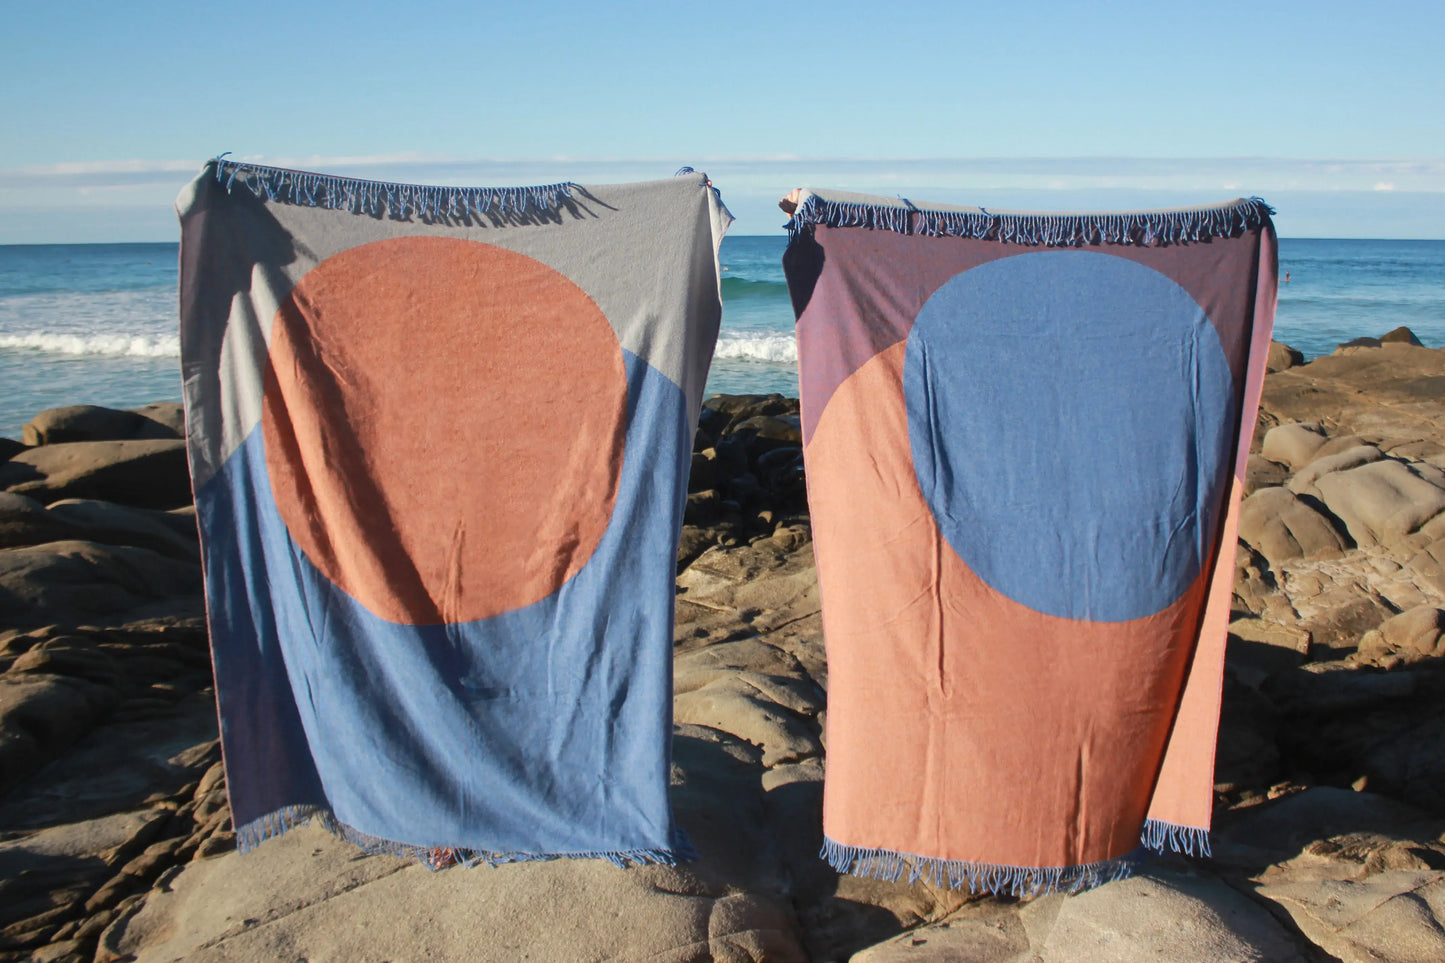 Two wool blankets being held up on a beach.